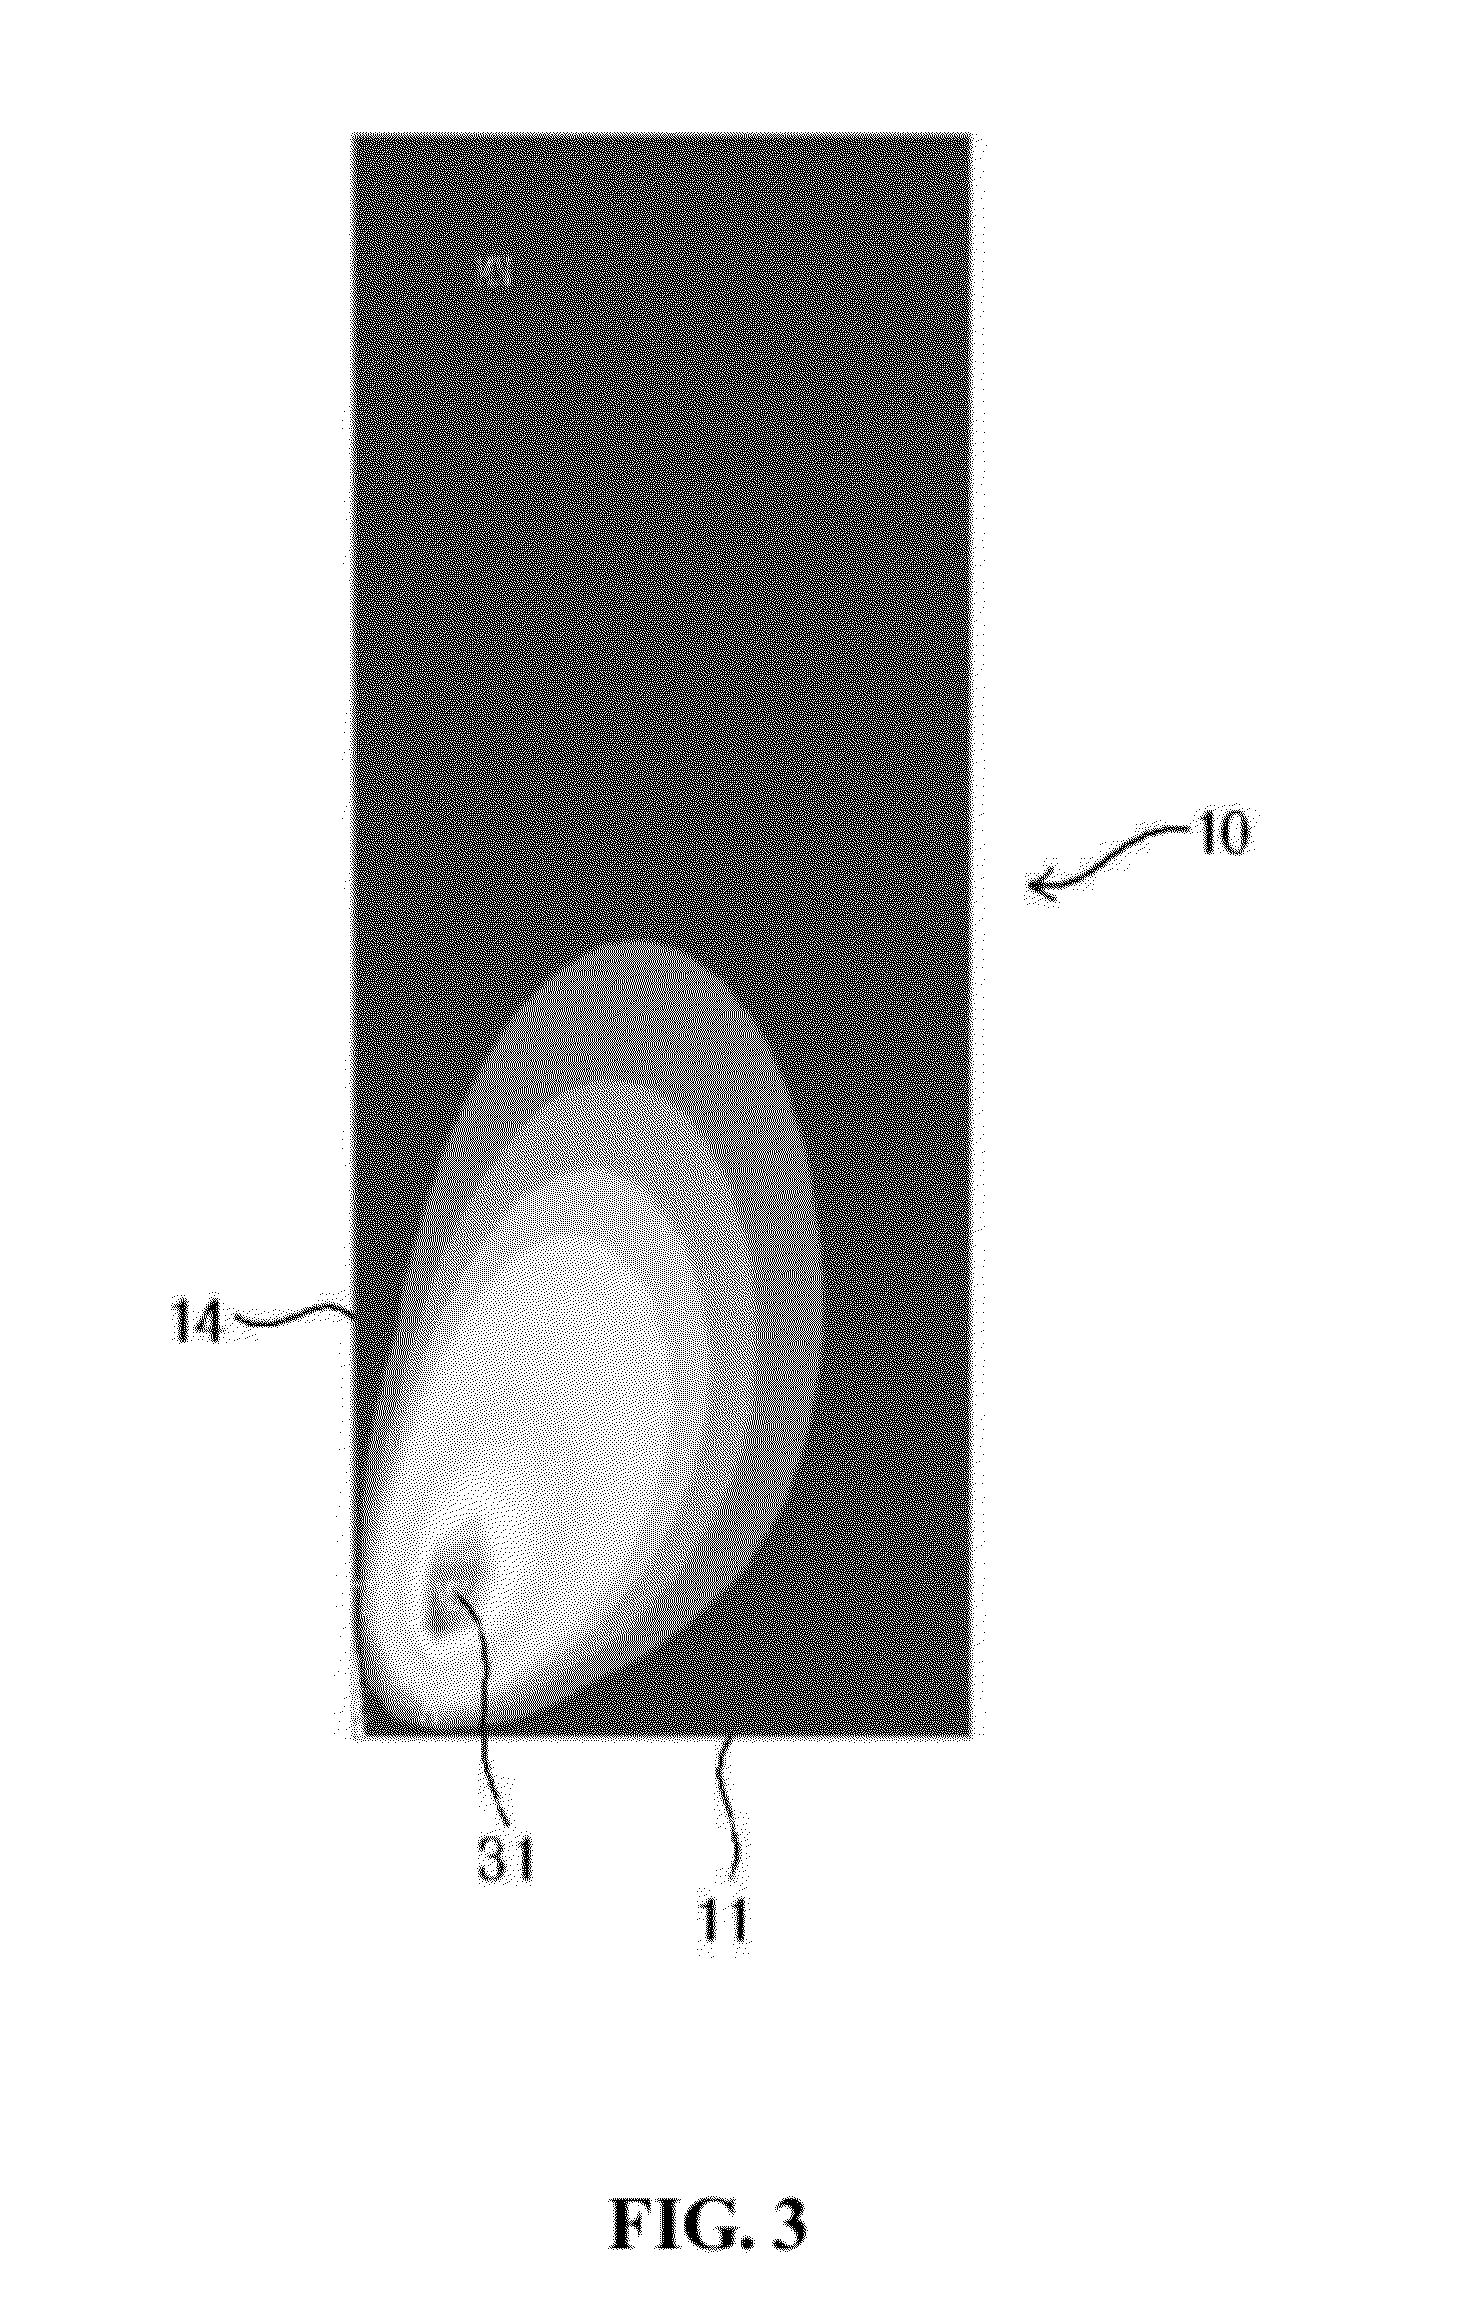 Locally Vibrating Haptic Apparatus, Method for Locally Vibrating Haptic Apparatus, Haptic Display Apparatus and Vibrating Panel Using the Same